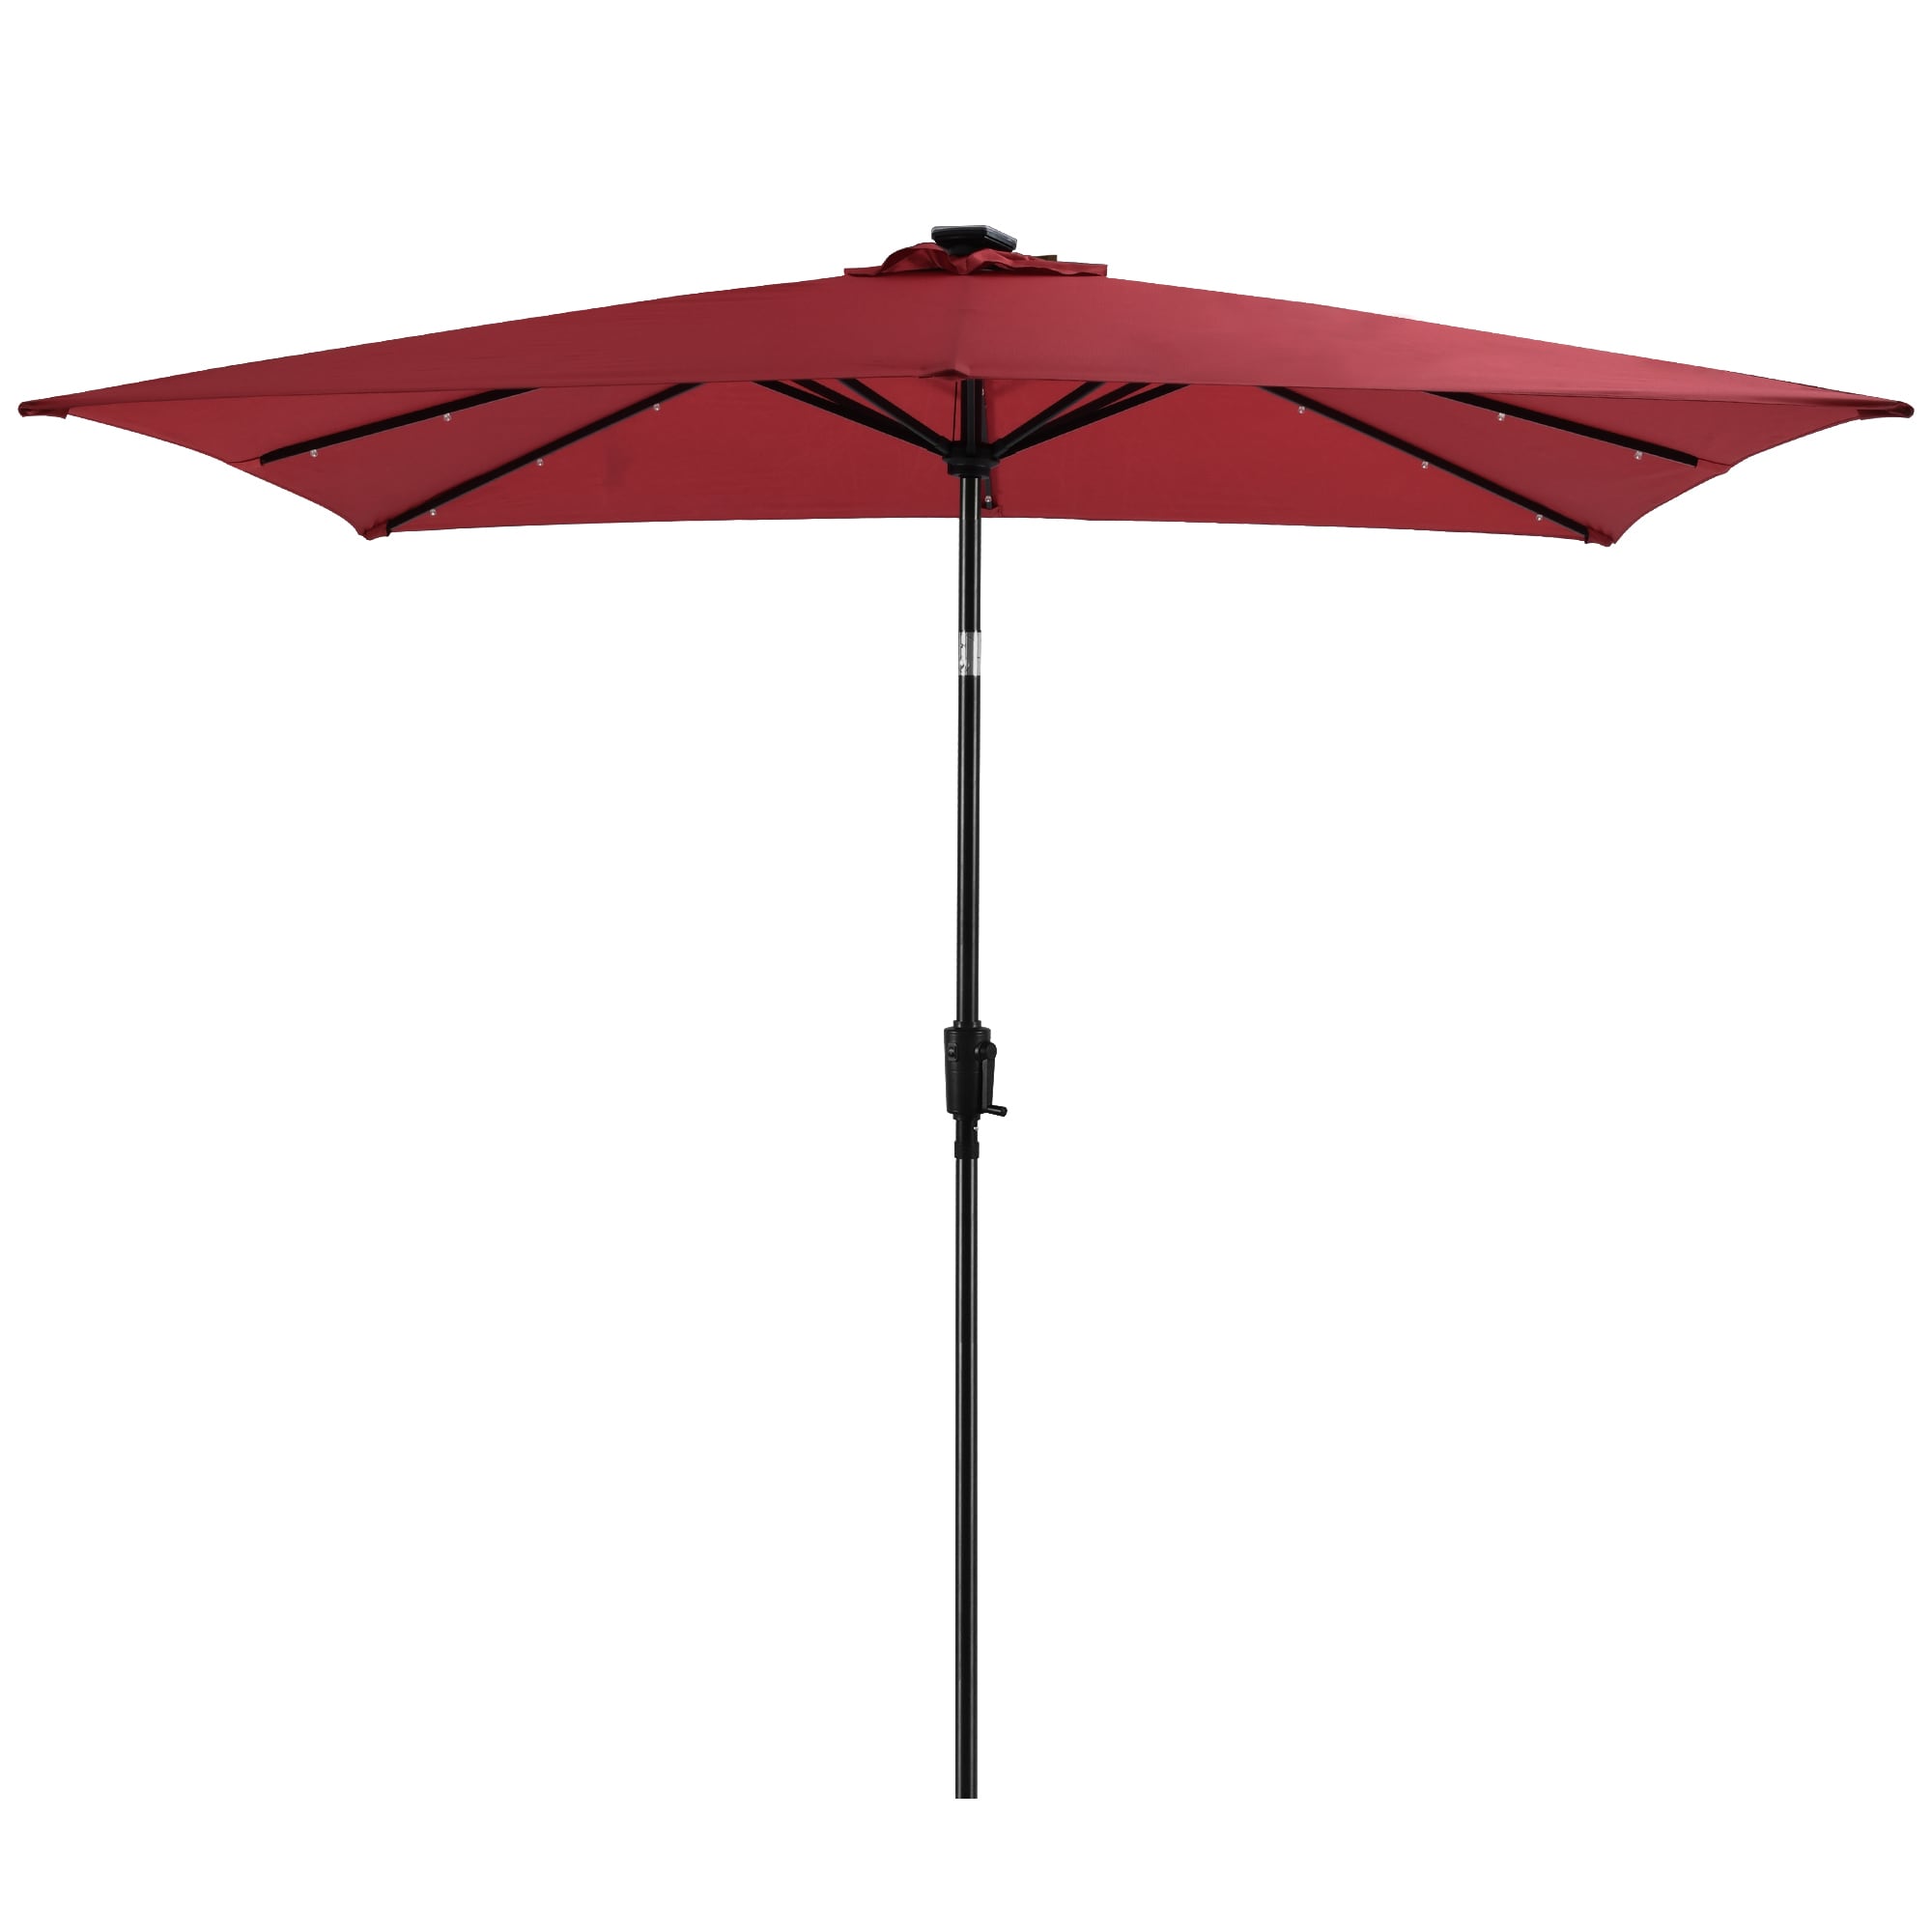 Sun-Ray 9' Round Patio Umbrella with Push-Button Tilt and Hand Crank Lift System, Outdoor Umbrella with Black Frame and Polyester Fabric for Patio, Deck, and Yard